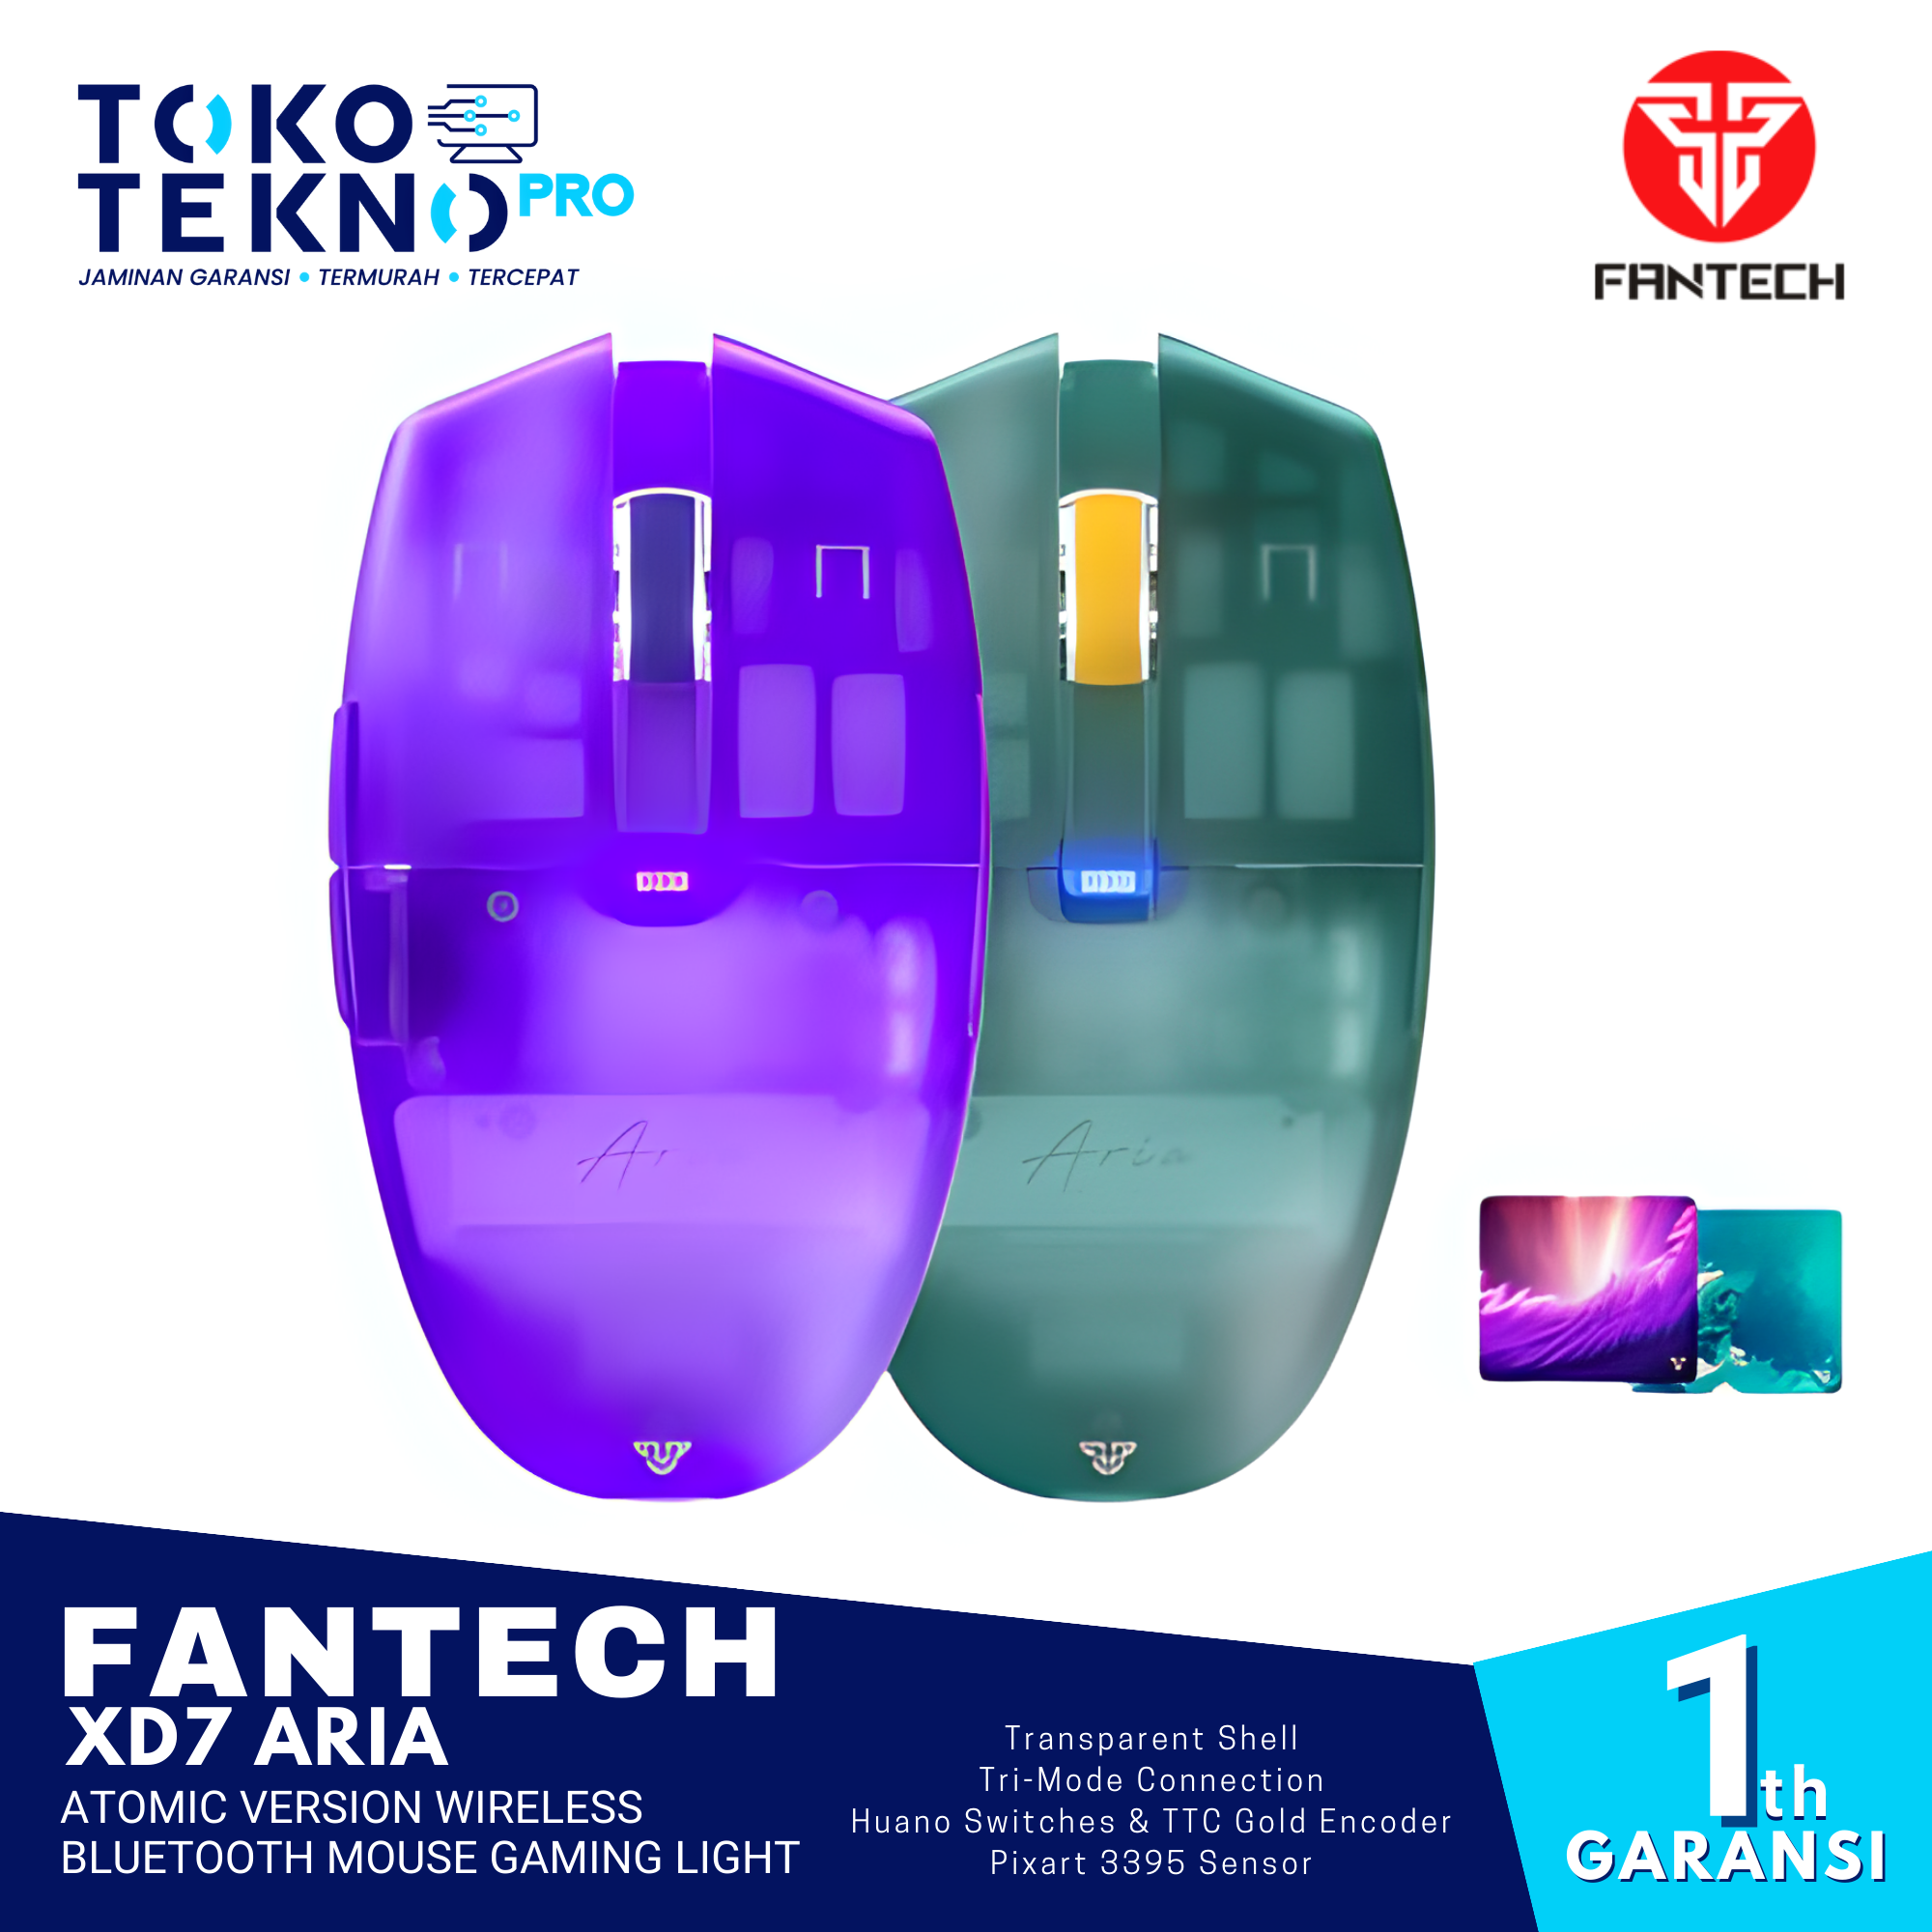 Fantech XD7 Aria Atomic Version Wireless Bluetooth Mouse Gaming Light